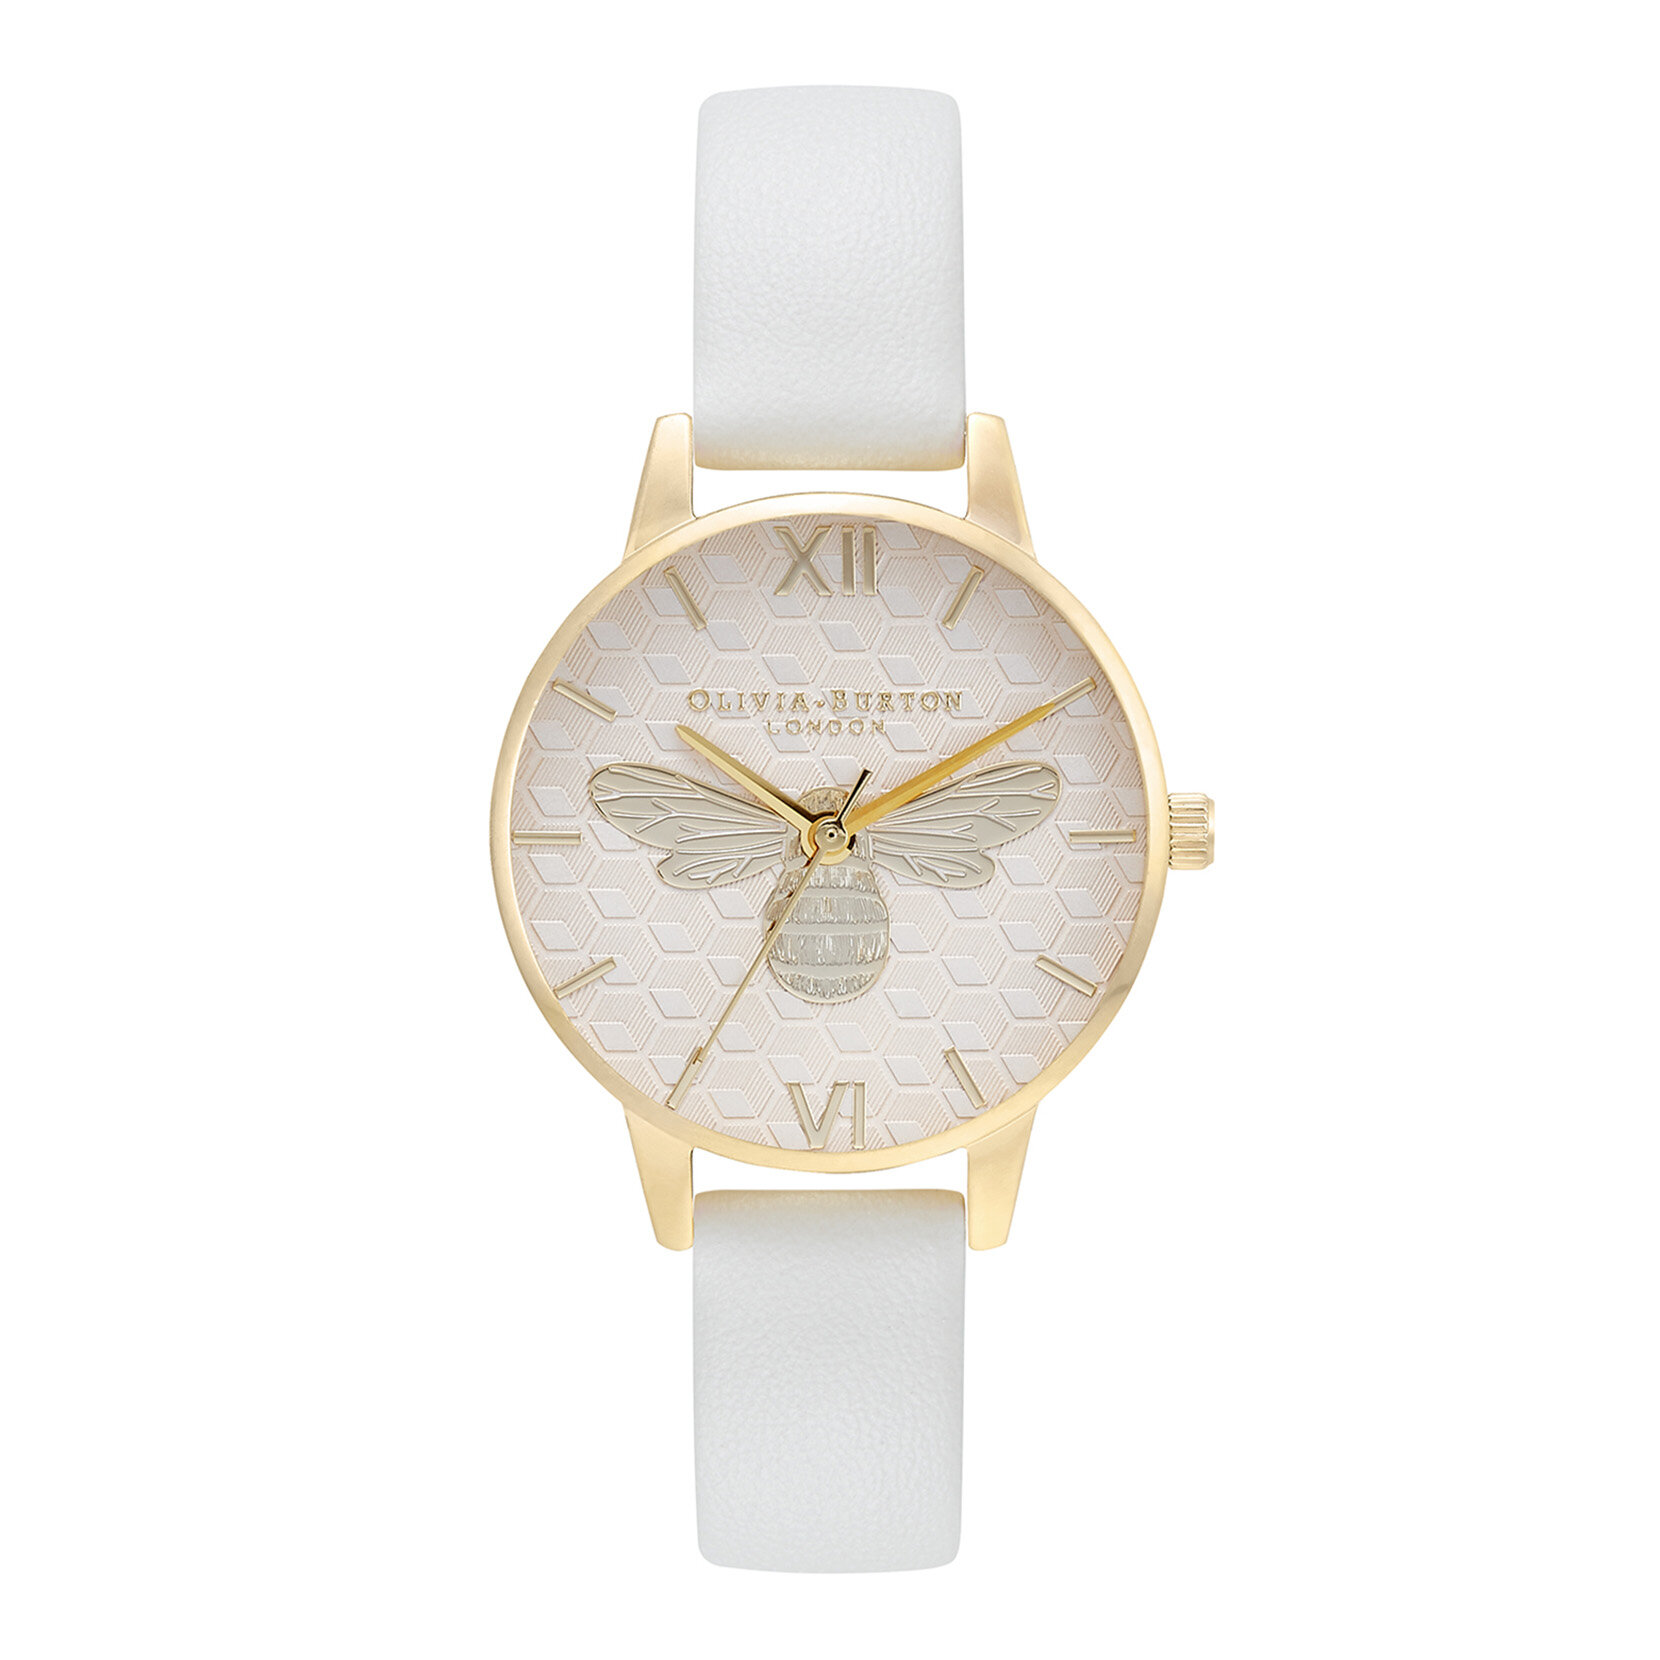 30mm Gold & Cream Leather Strap Watch